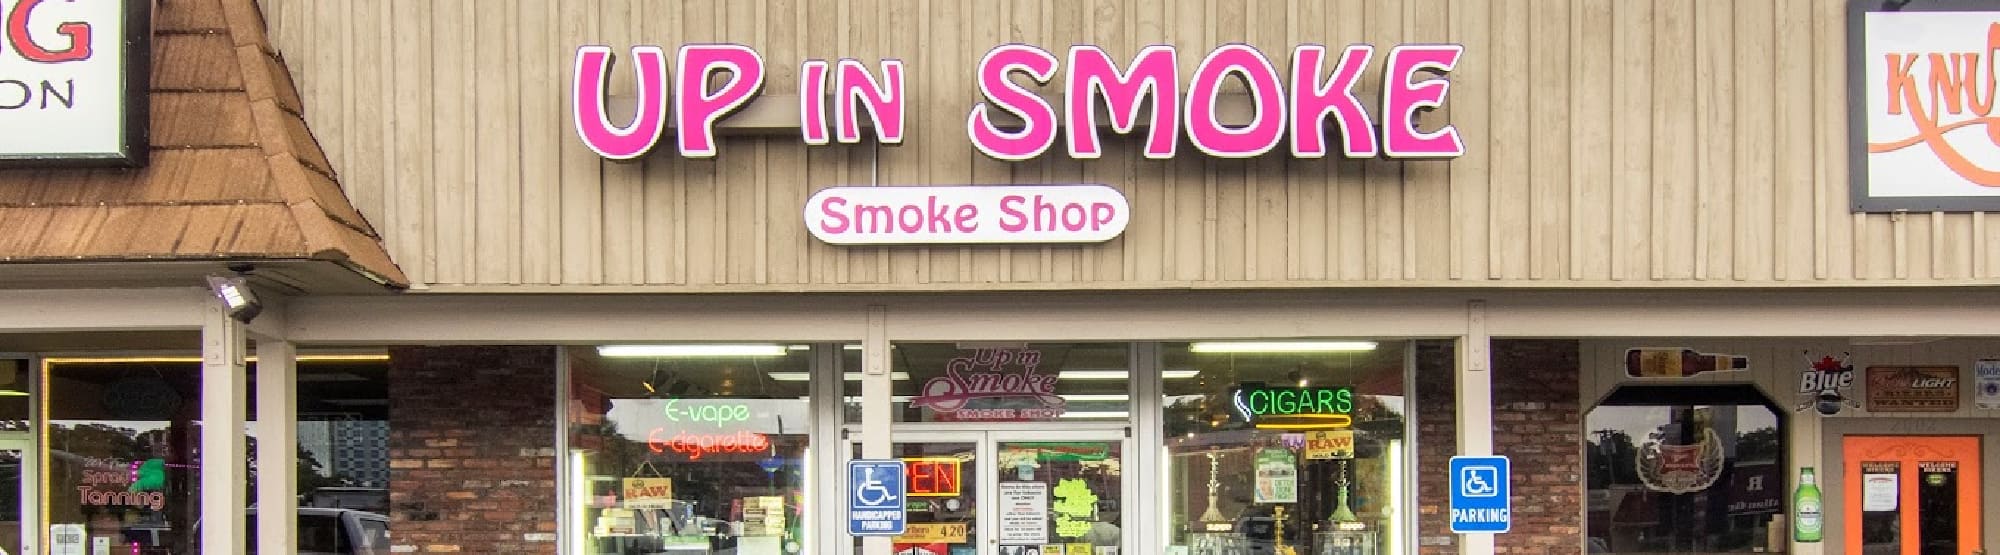 image of up in smoke in myrtle beach sc